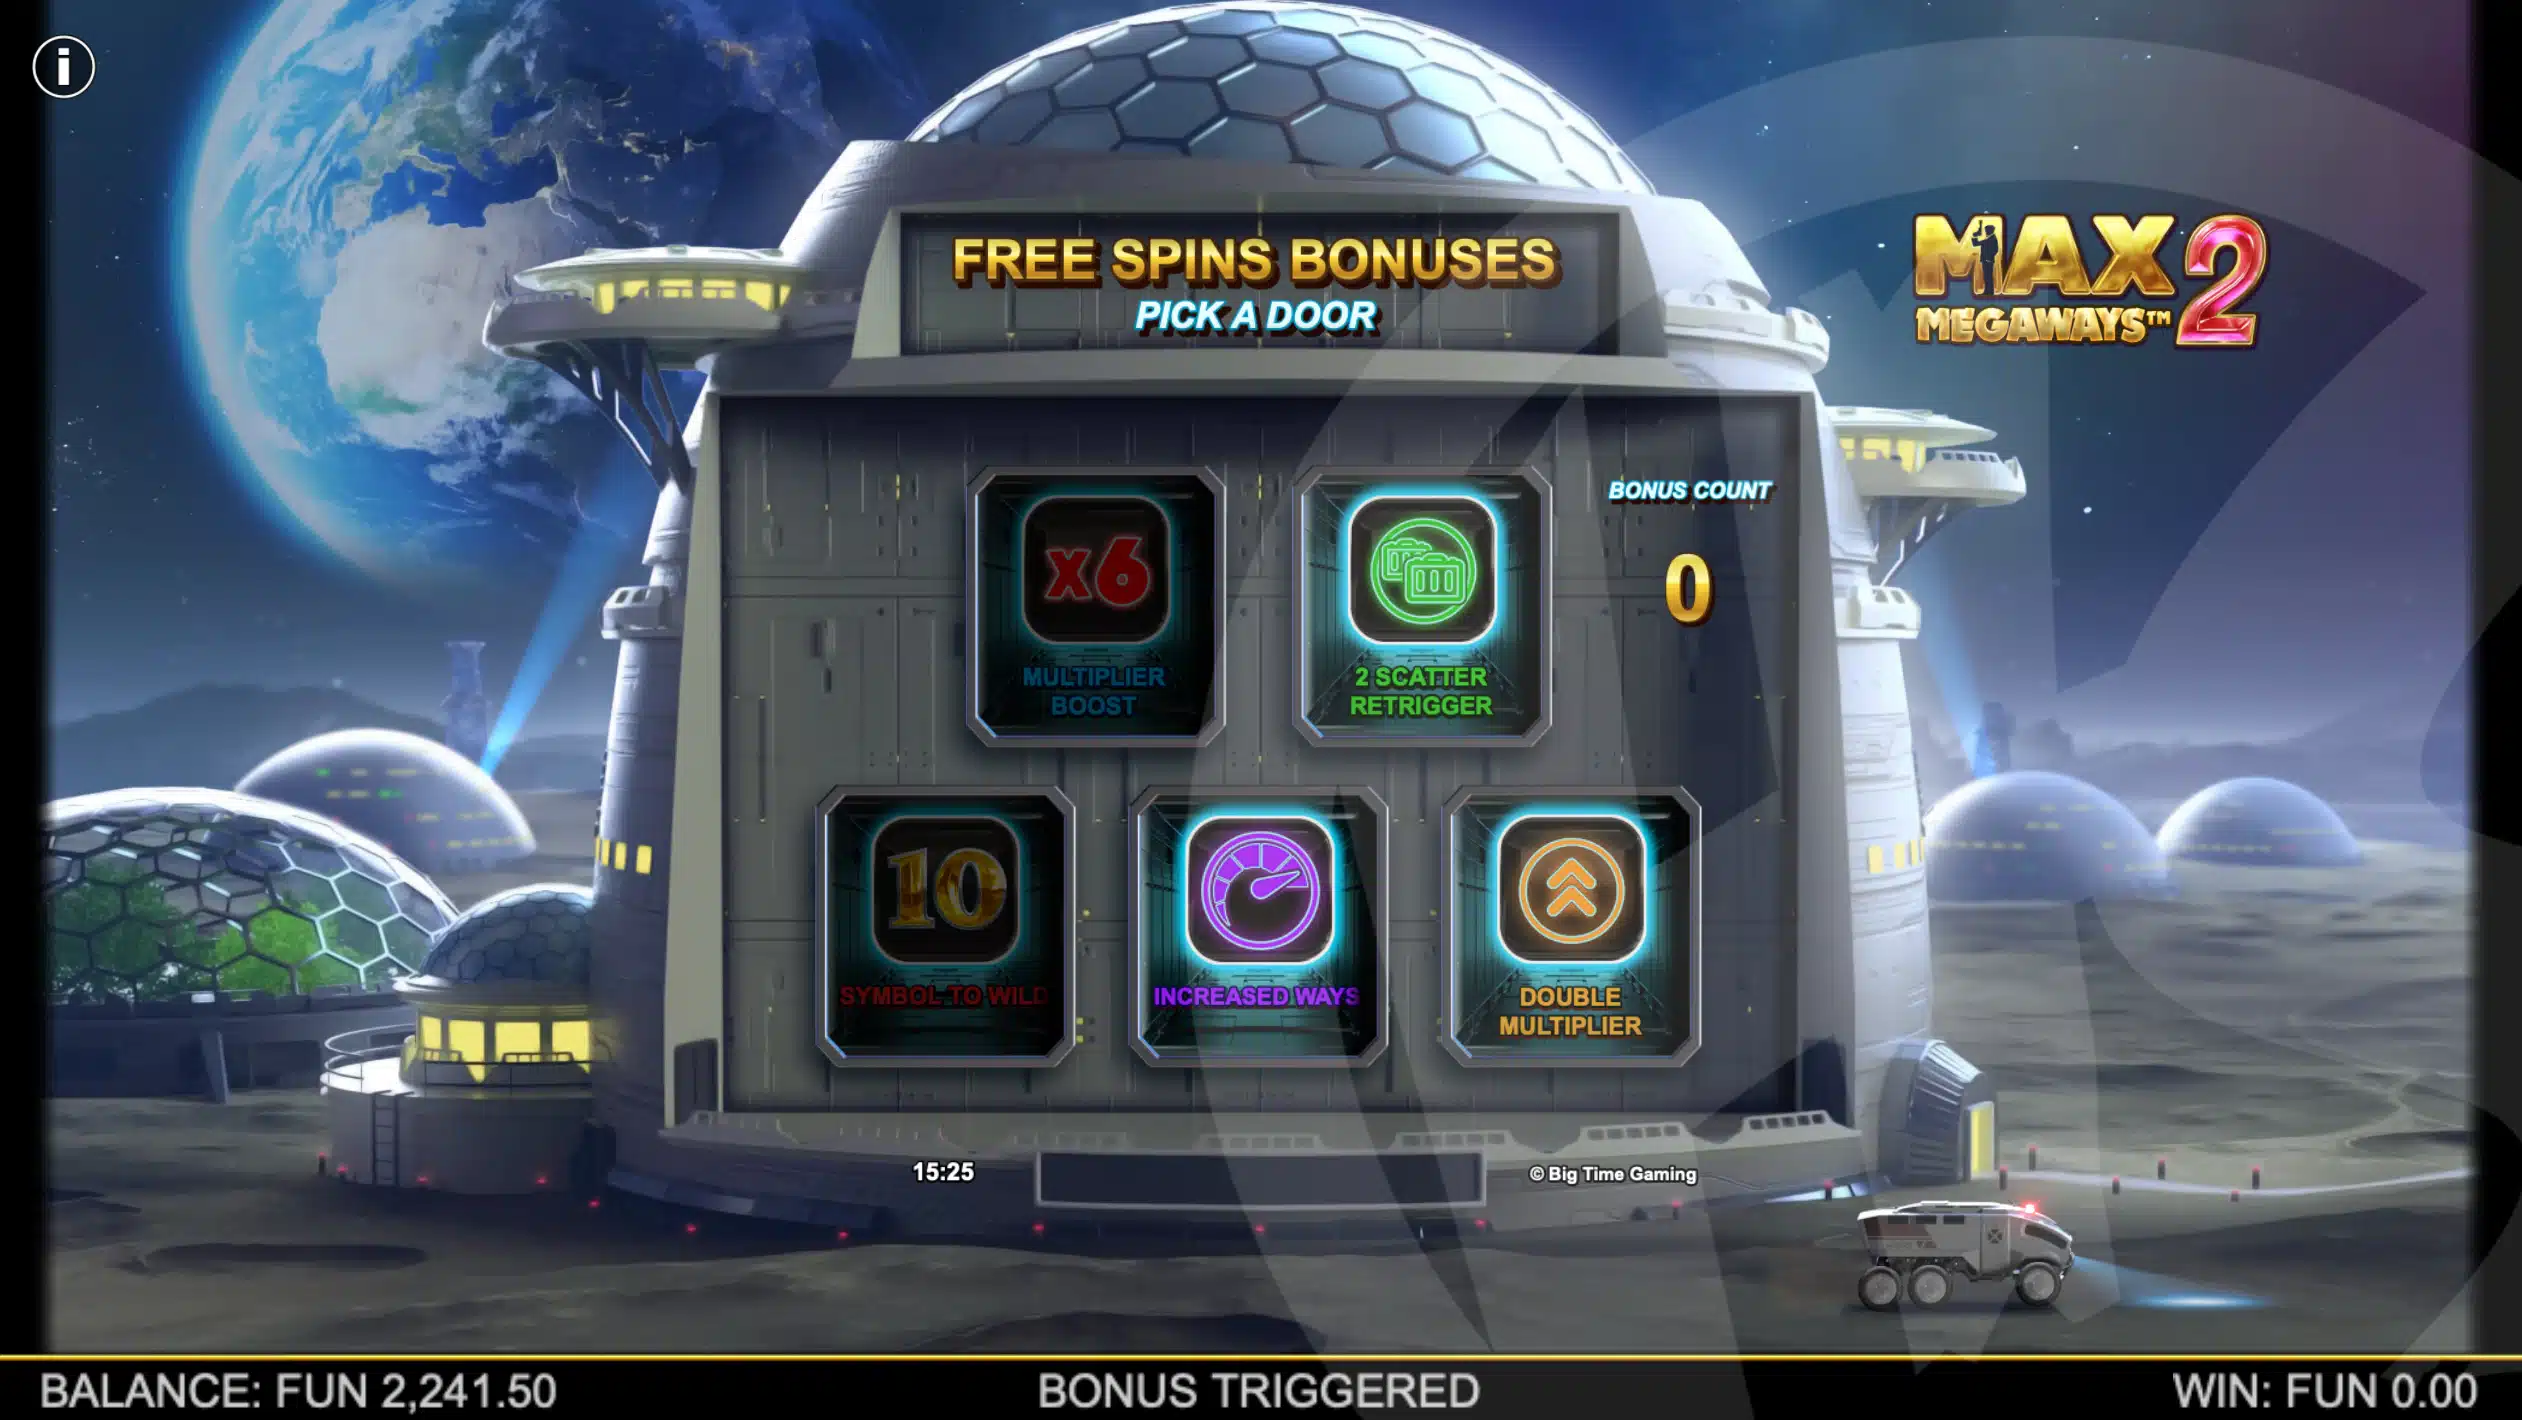 Choose 2 or 3 Free Spins Bonuses for Free Spins and Enhanced Free Spins Respectively